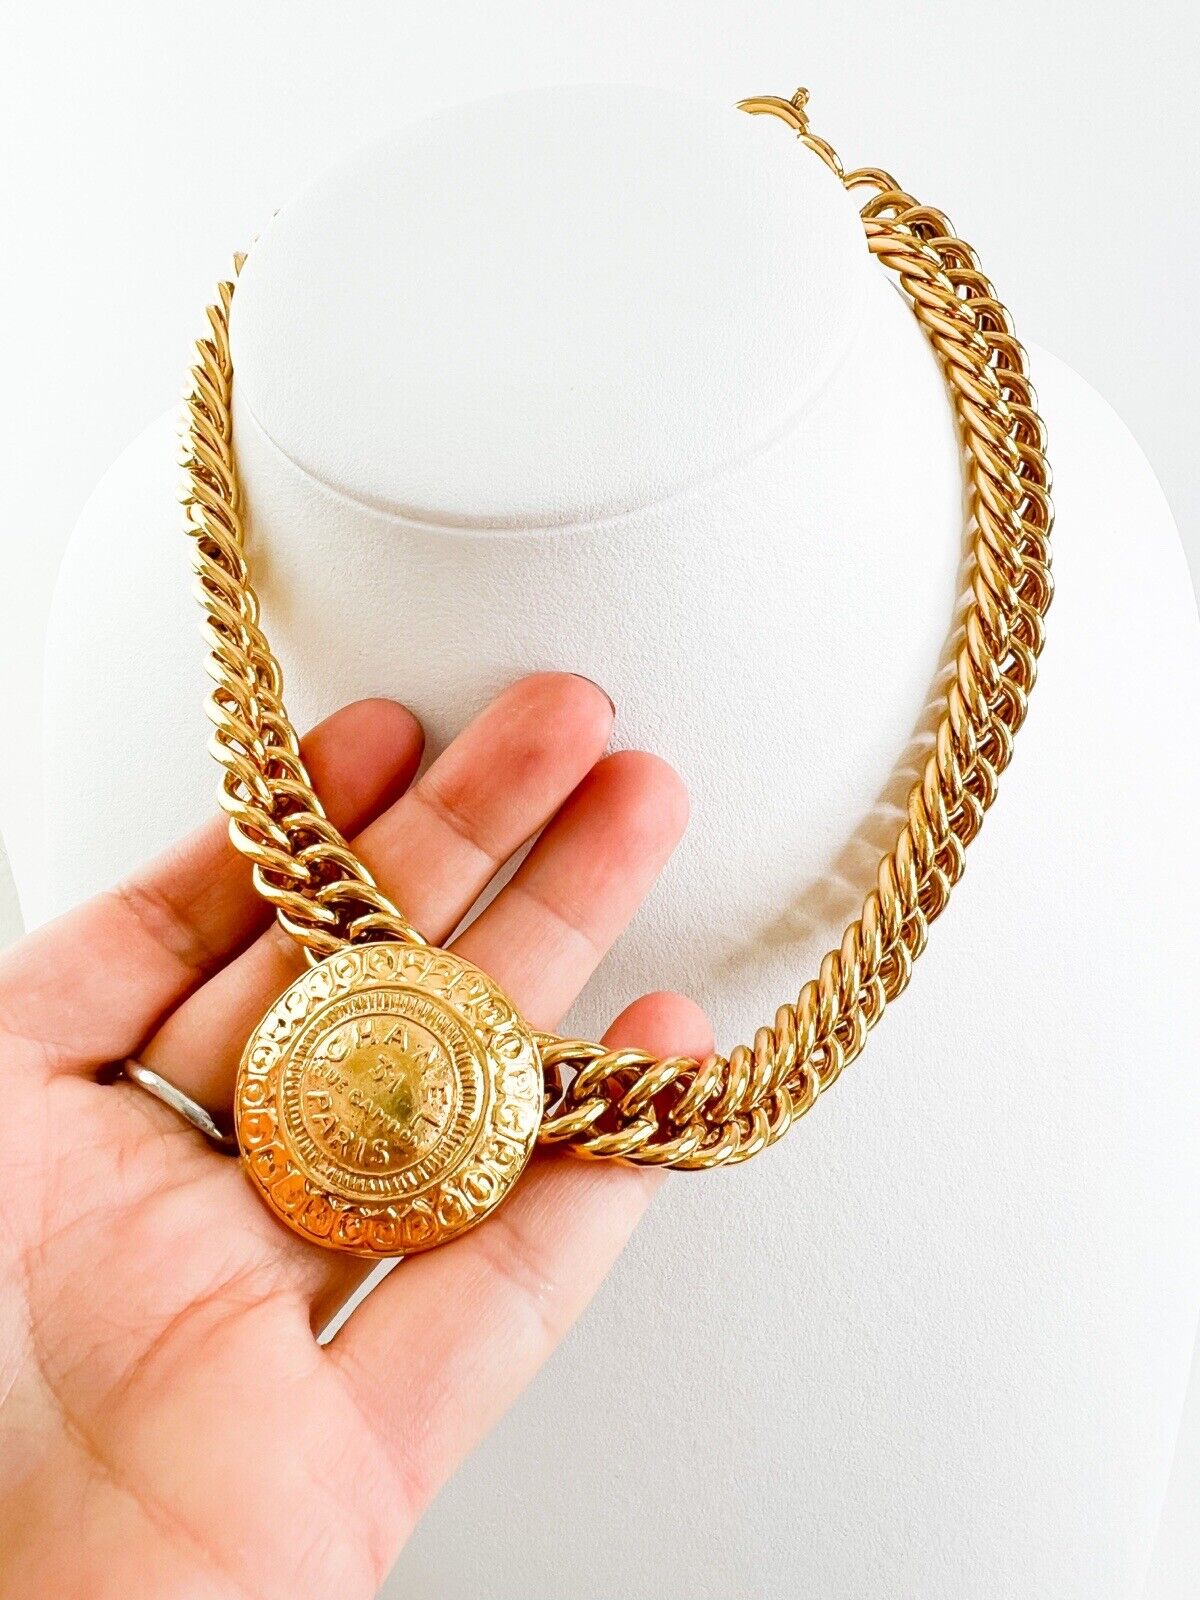 Vintage Chanel Necklace, Choker Necklace, Gold Tone Necklace, Made in France, Charm Necklace, Chain Necklace, Vintage Jewelry, Gift for Her